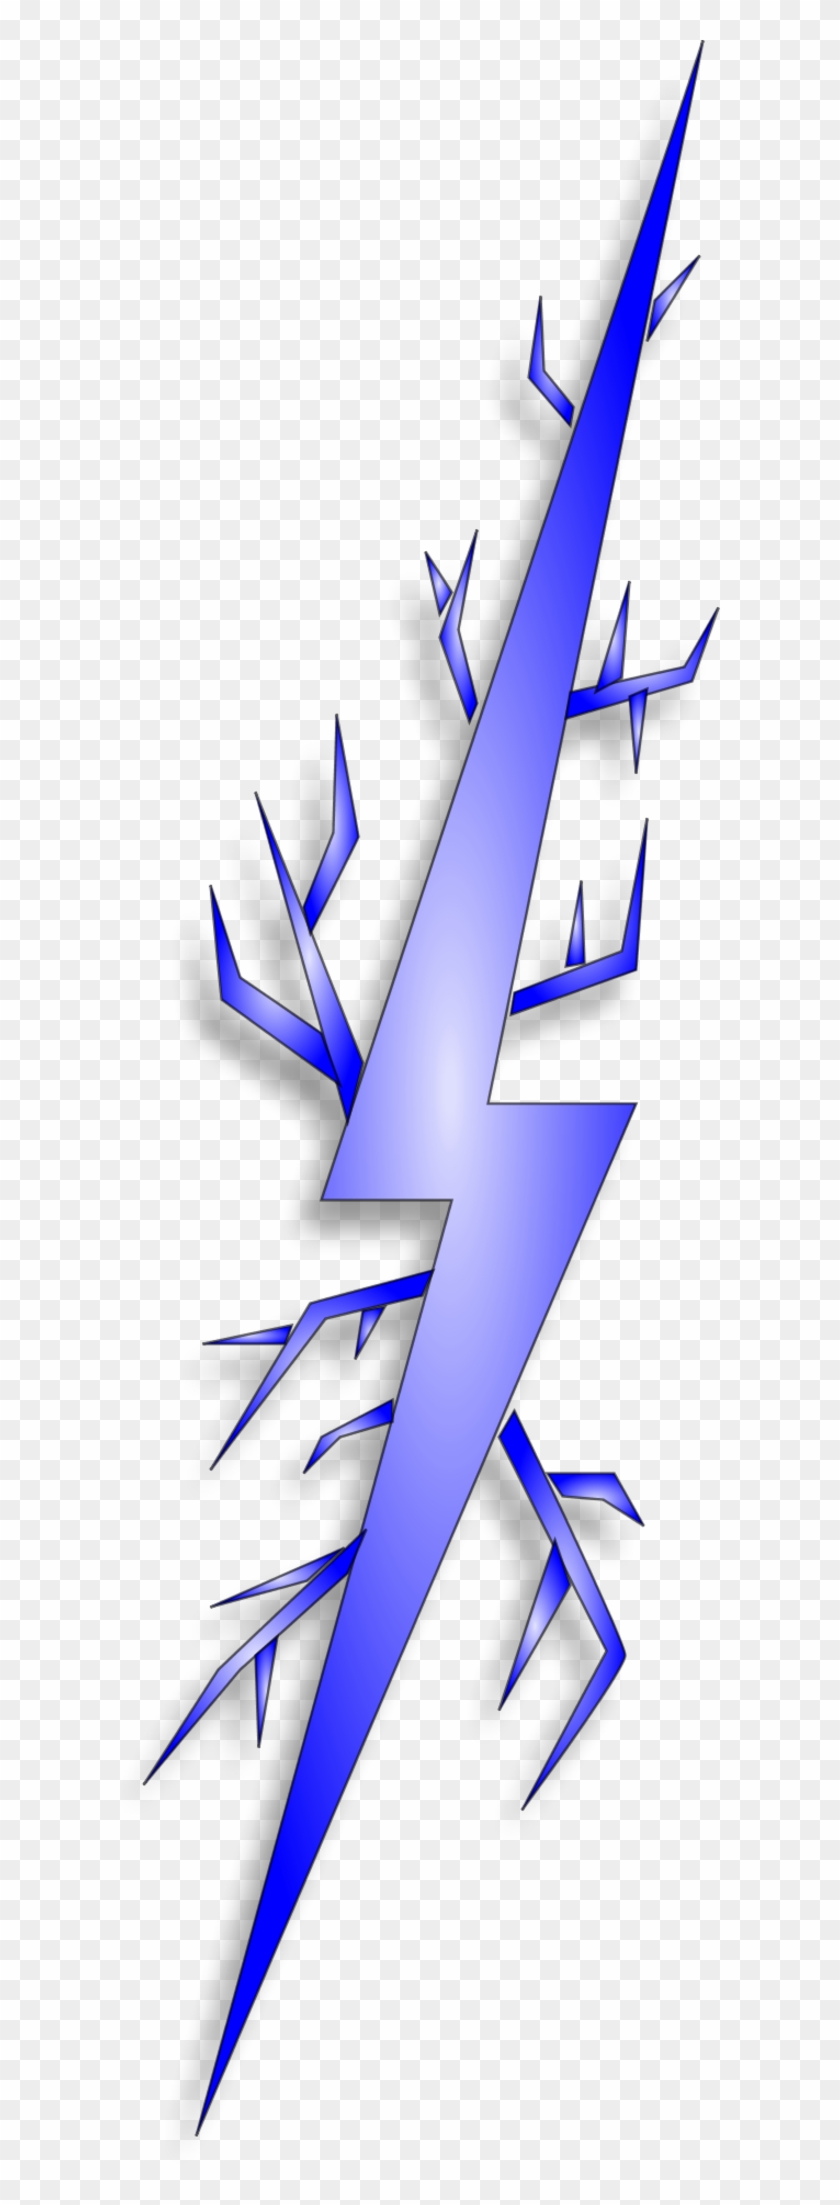 Thunder Clipart Electricity - Thunder Clipart Png #825801